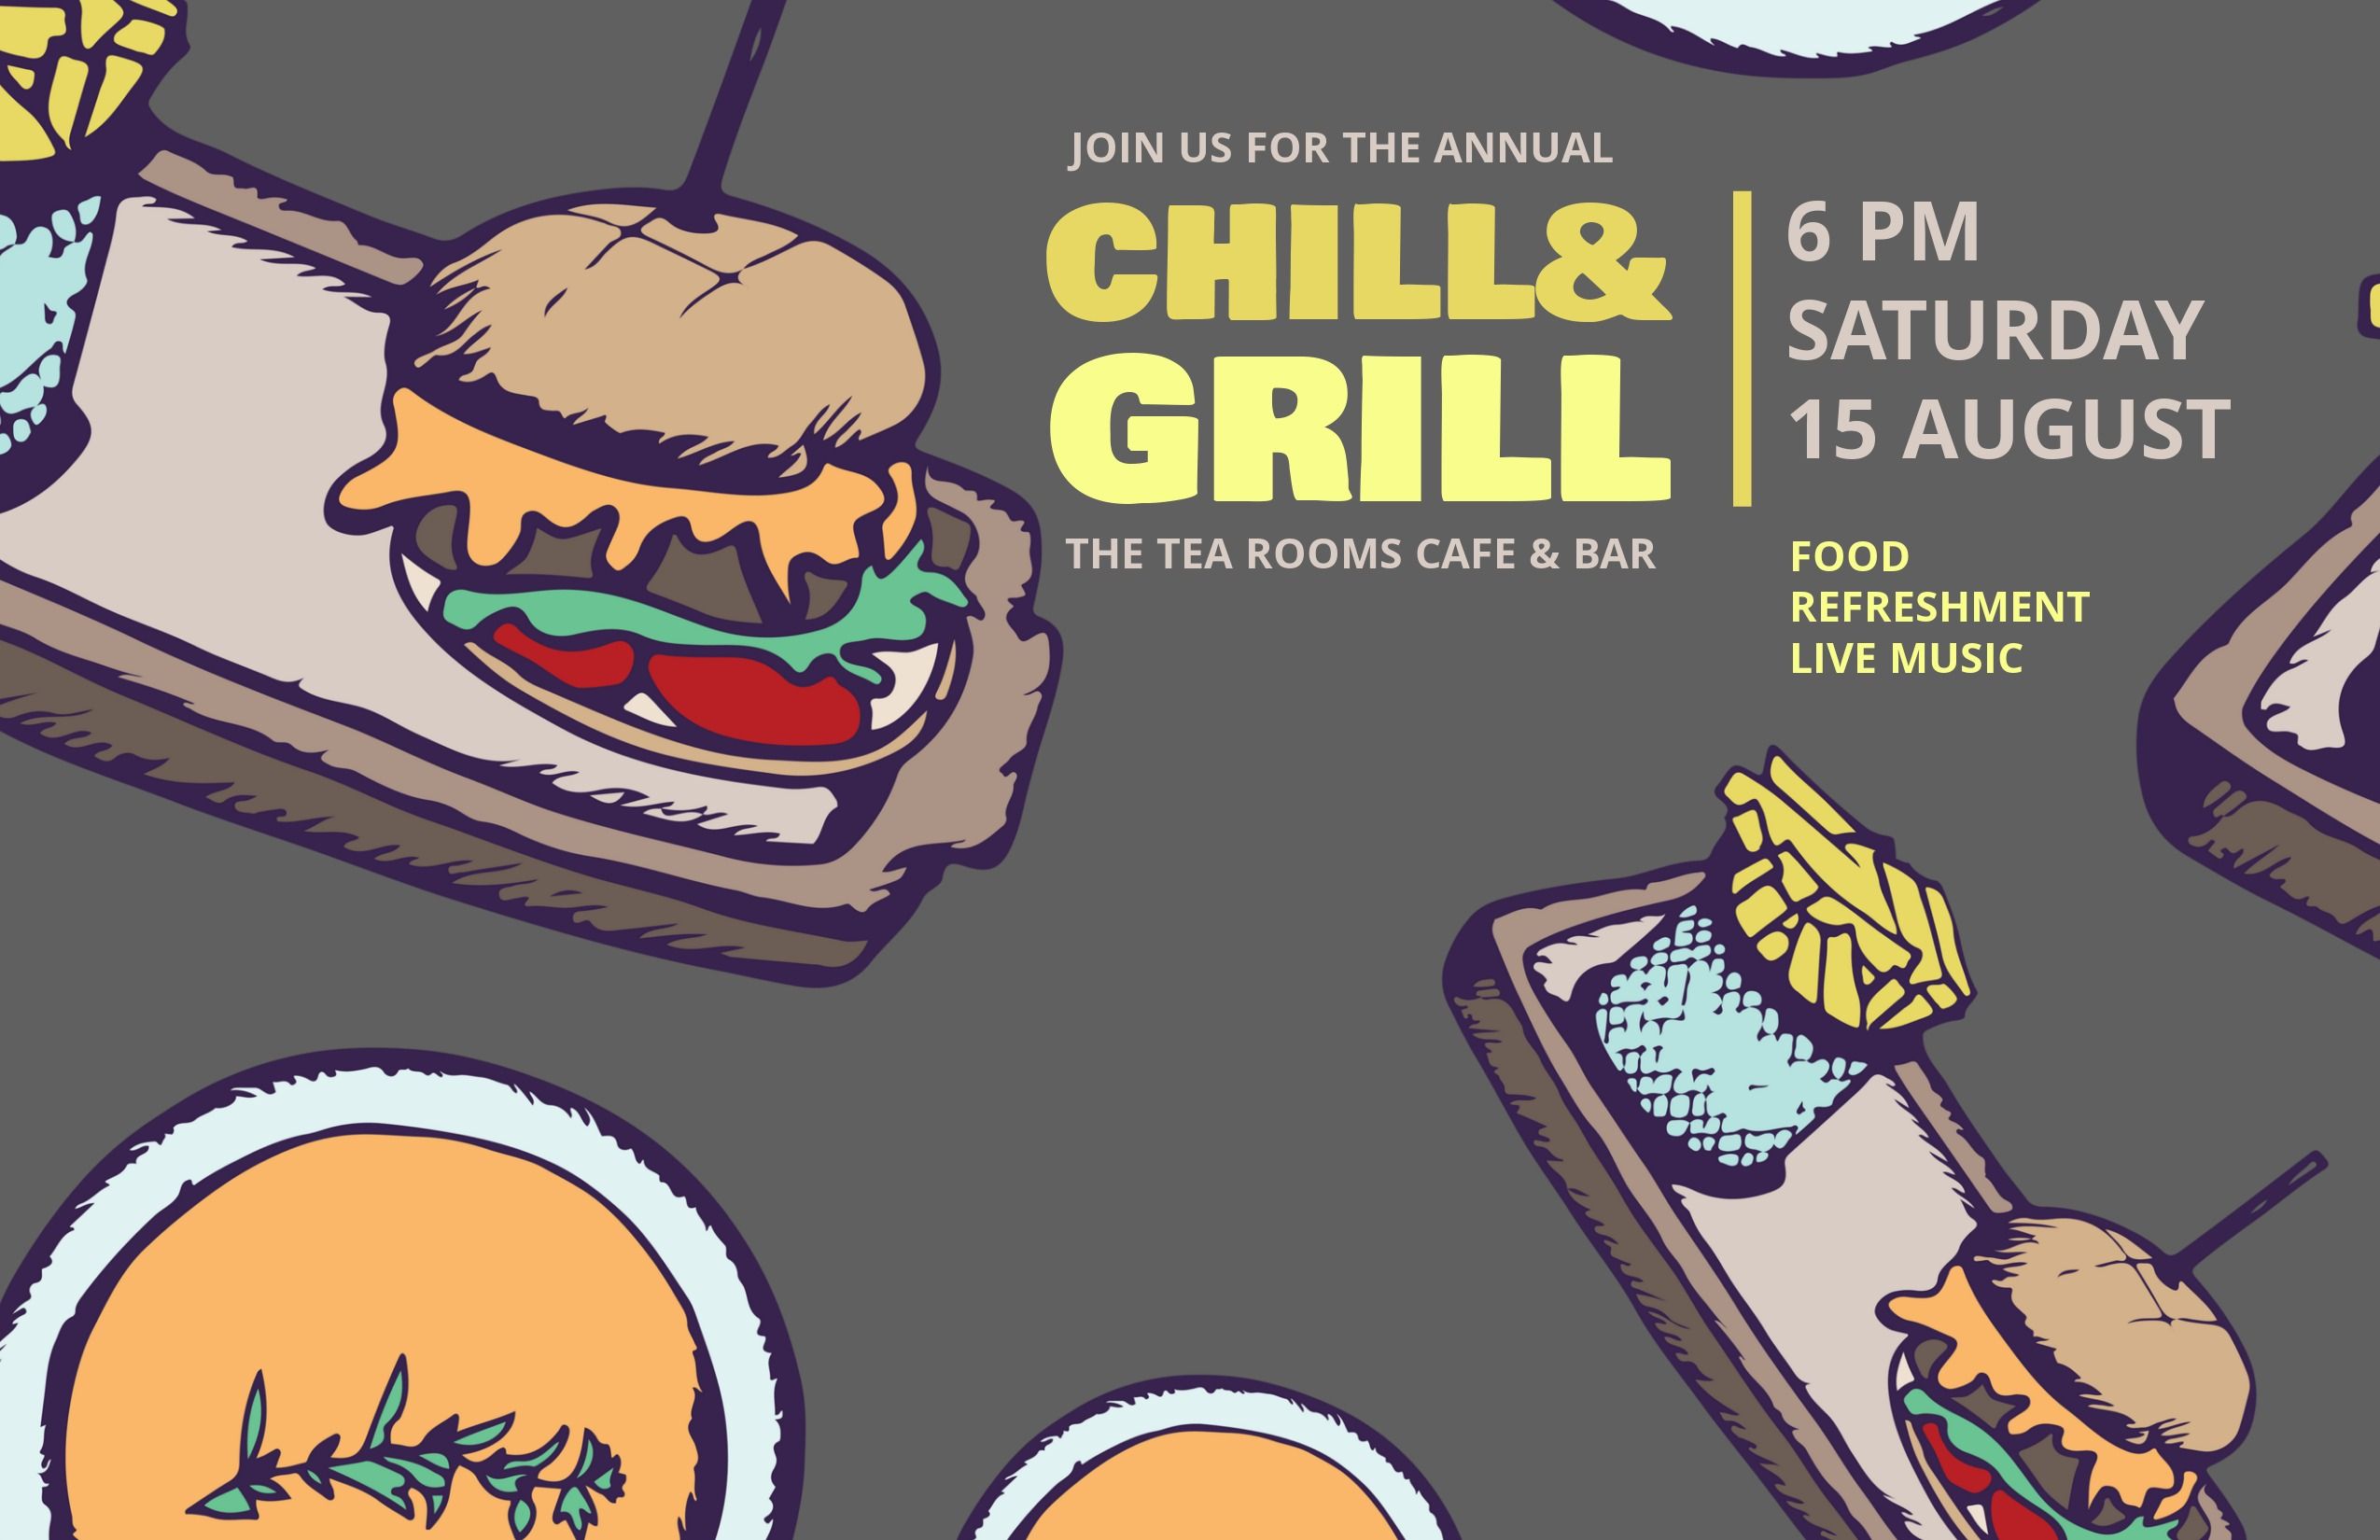 Chill and grill summer party bbq - 50 ideas and templates to use in your designs - Image